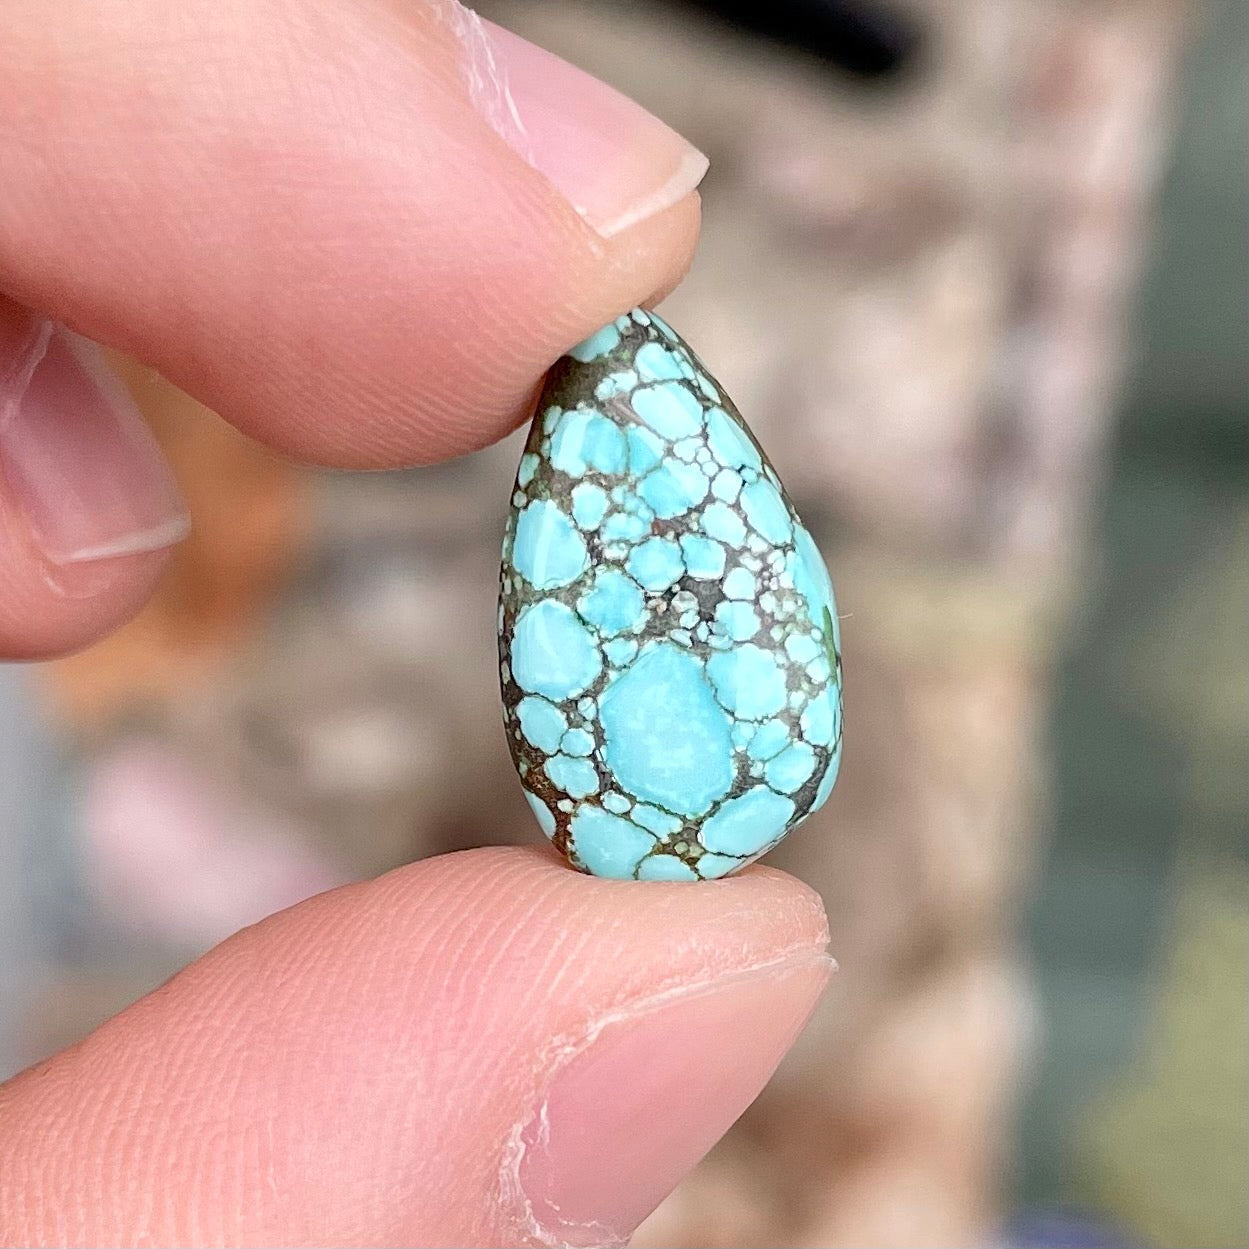 A loose, drop shaped turquoise stone from Number 8 Mine, Nevada.